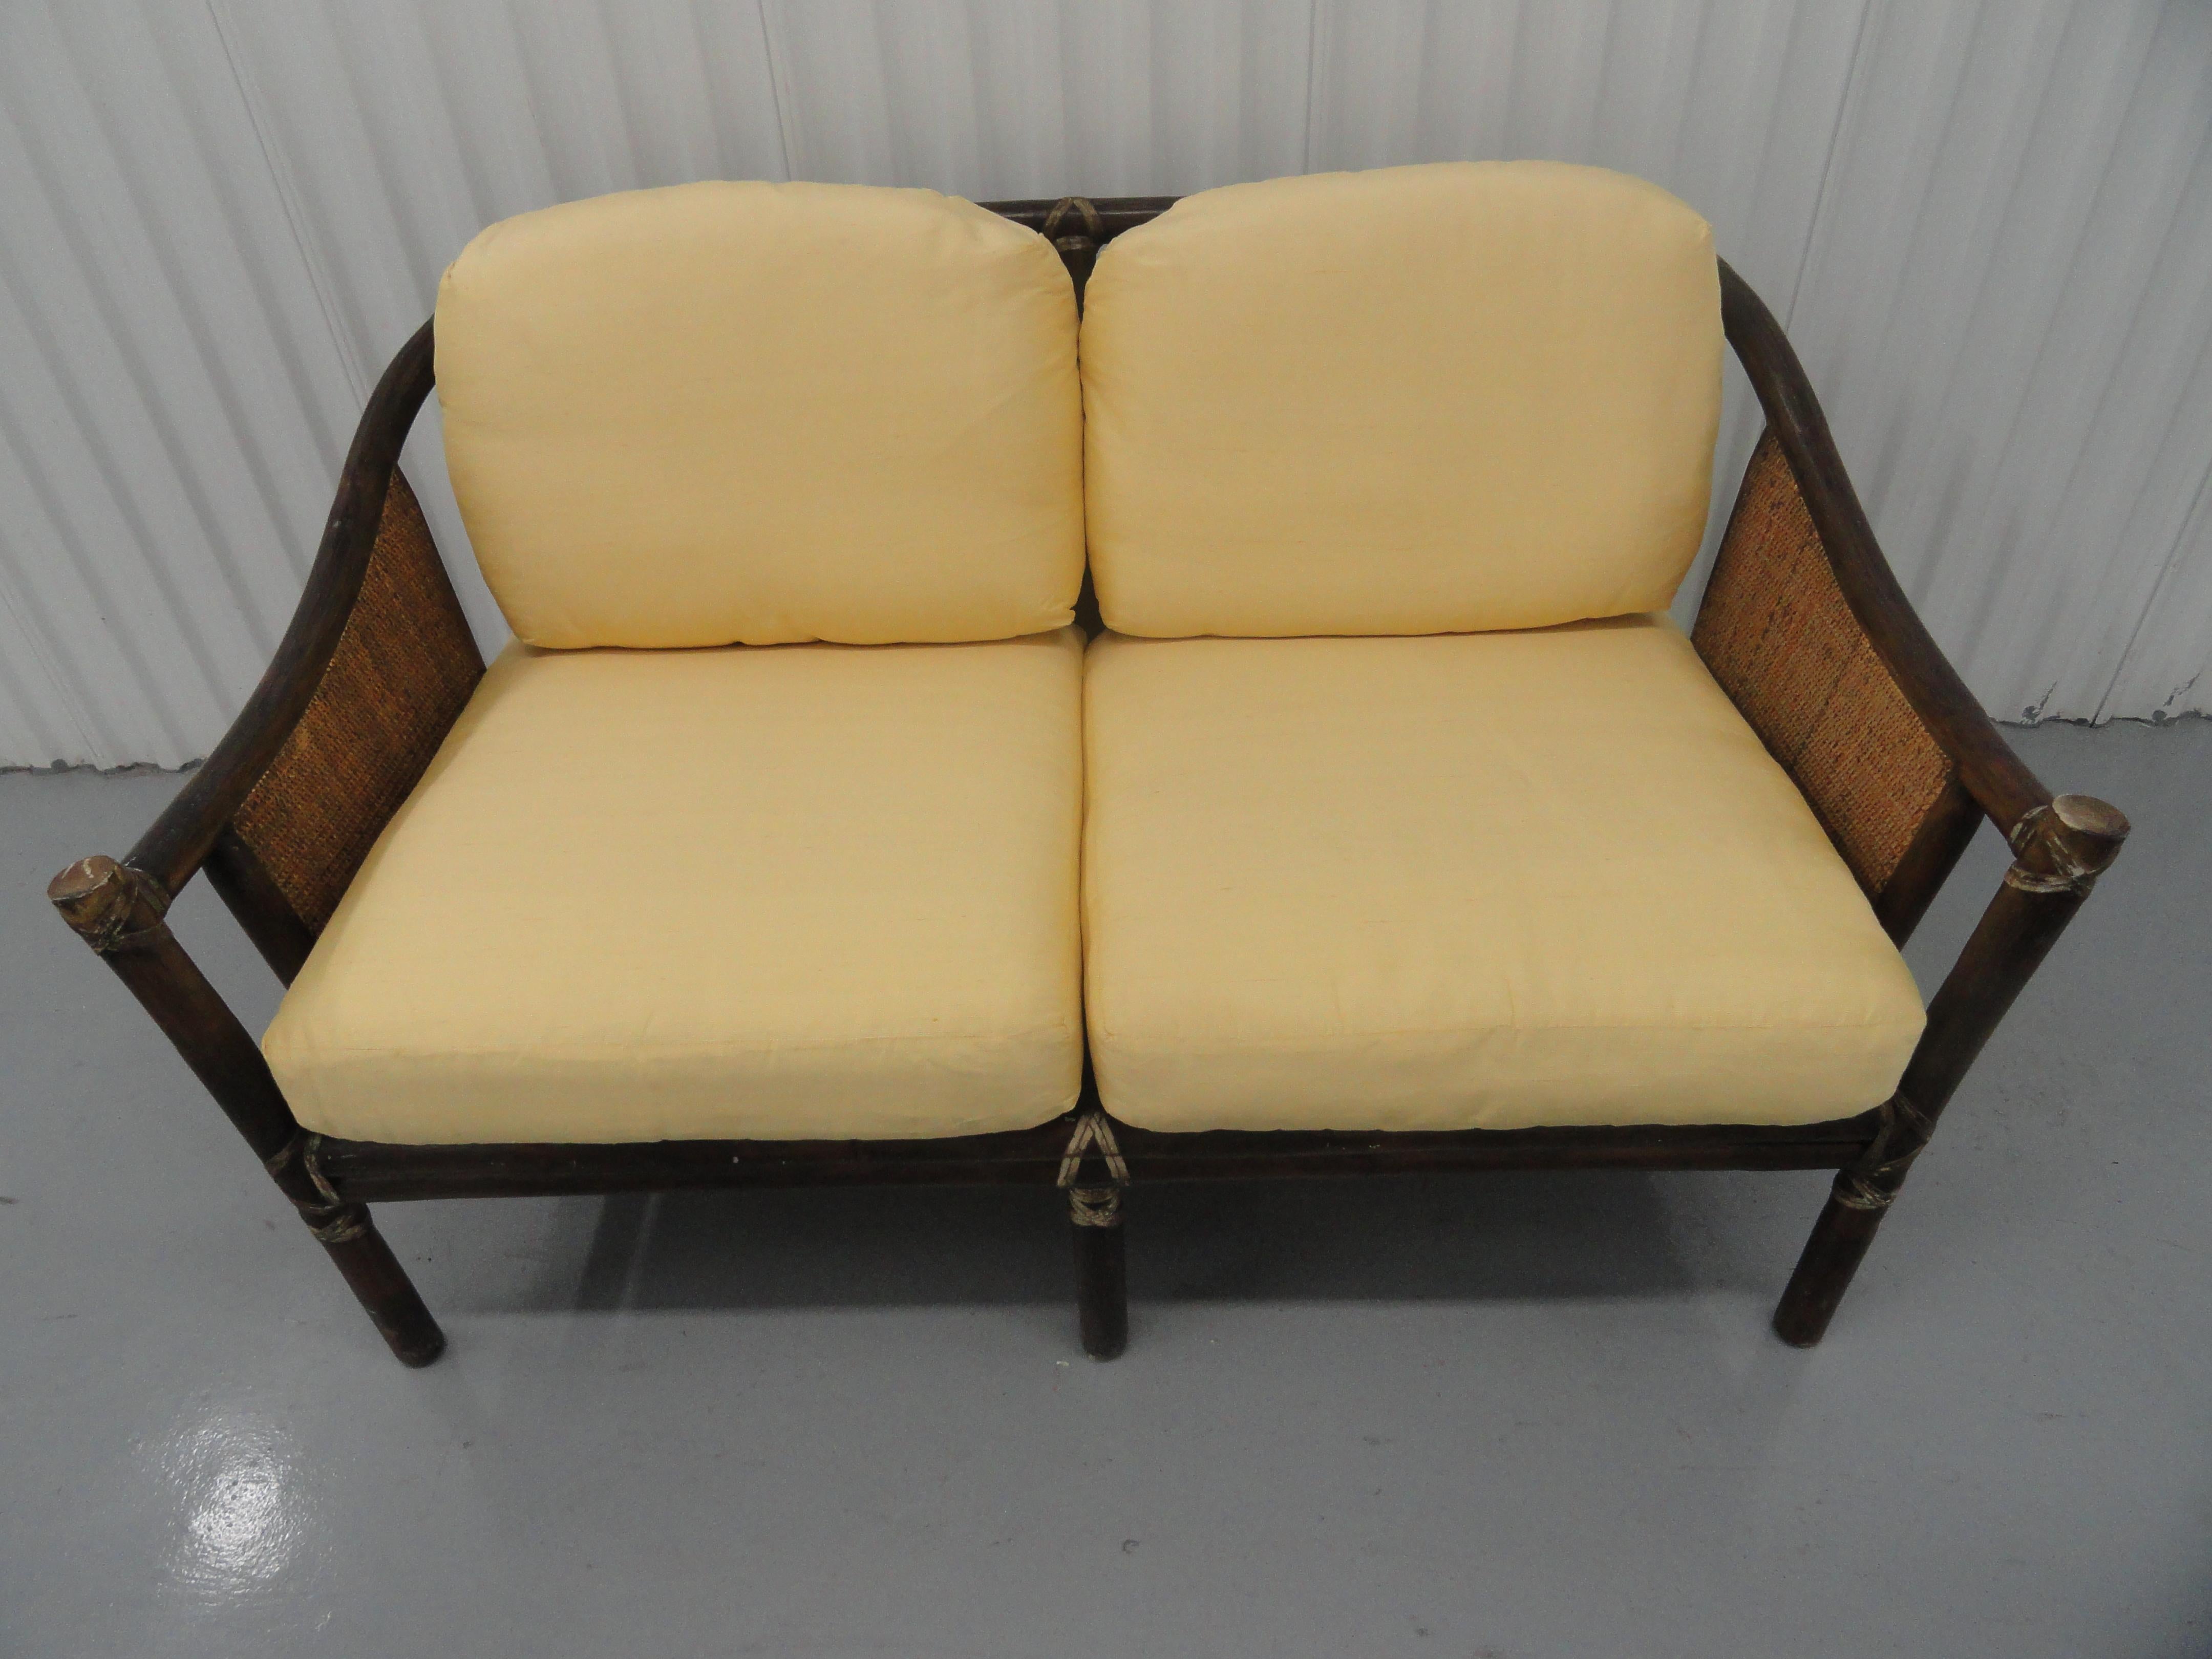 Classic McGuire settee with new strapping and newer upholstered cushions in silk.